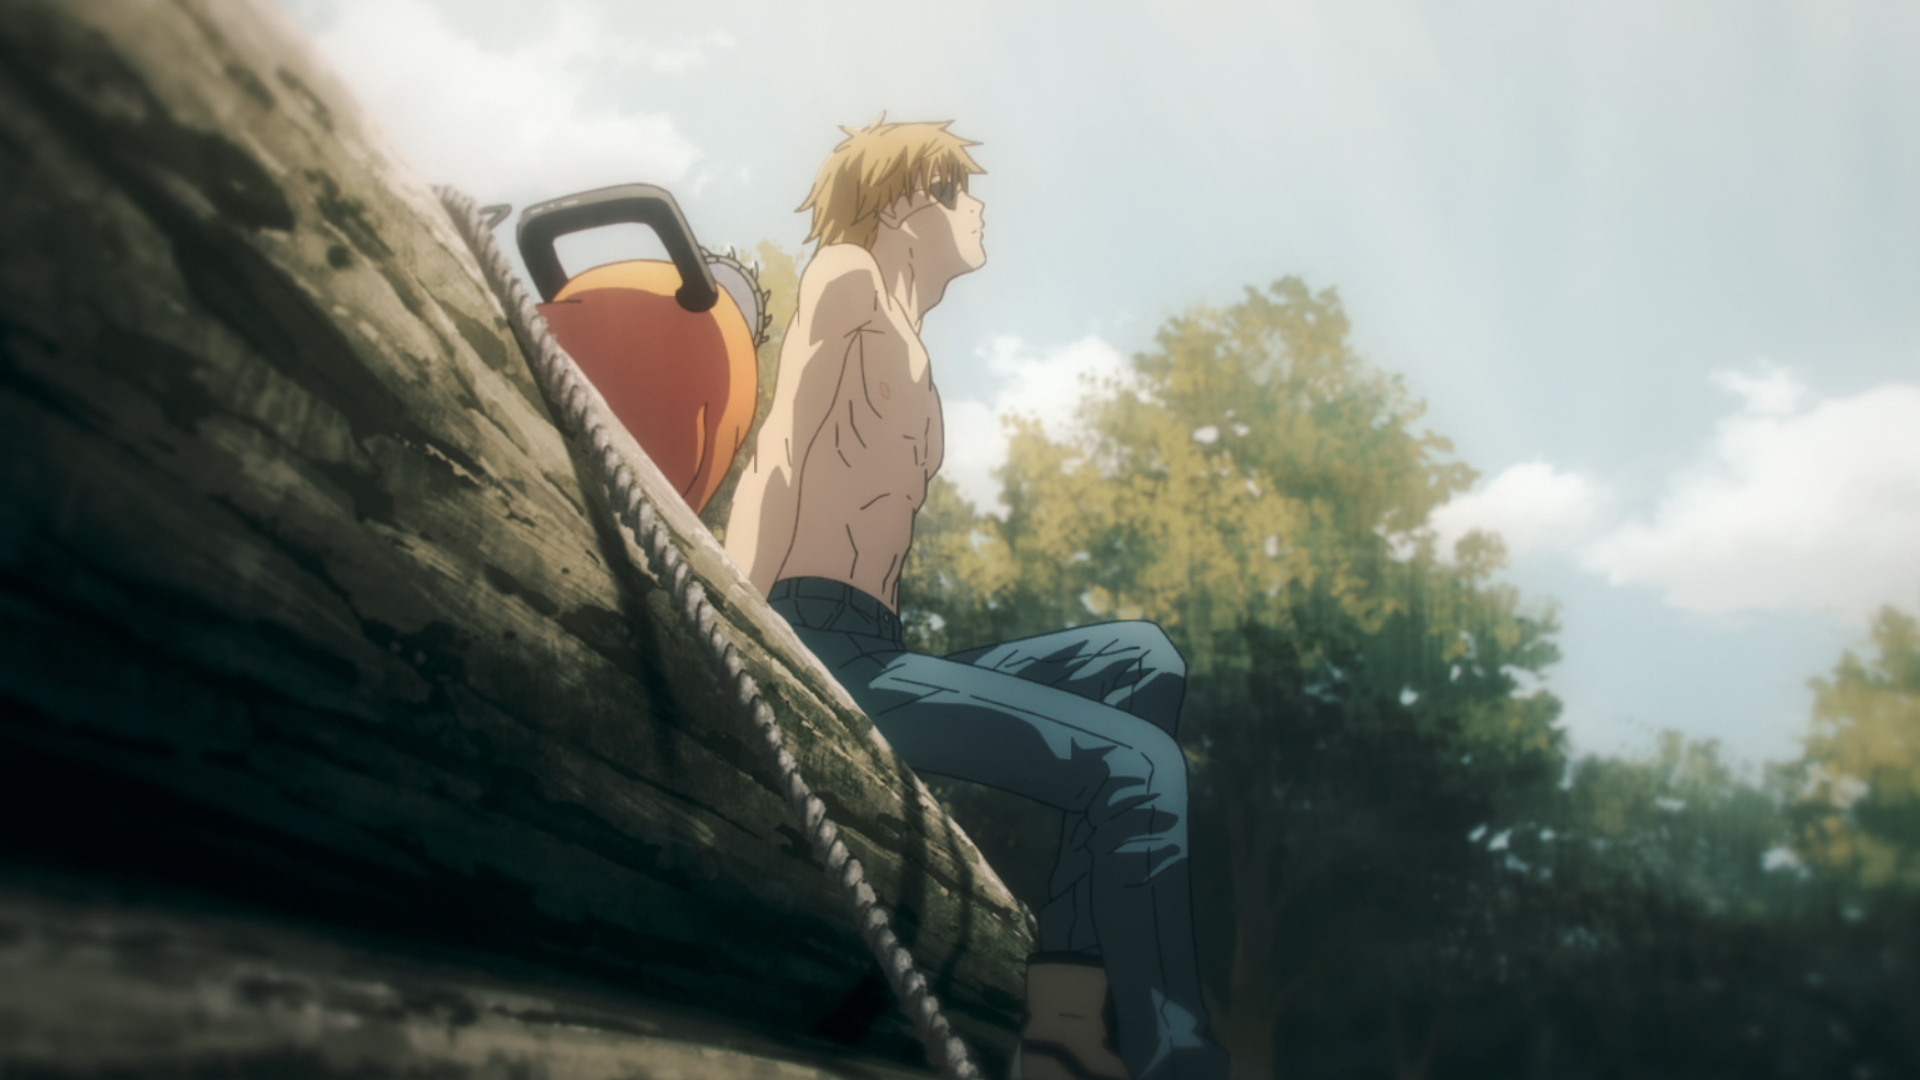 Anime Corner - JUST IN: Chainsaw Man Episode 1 Preview